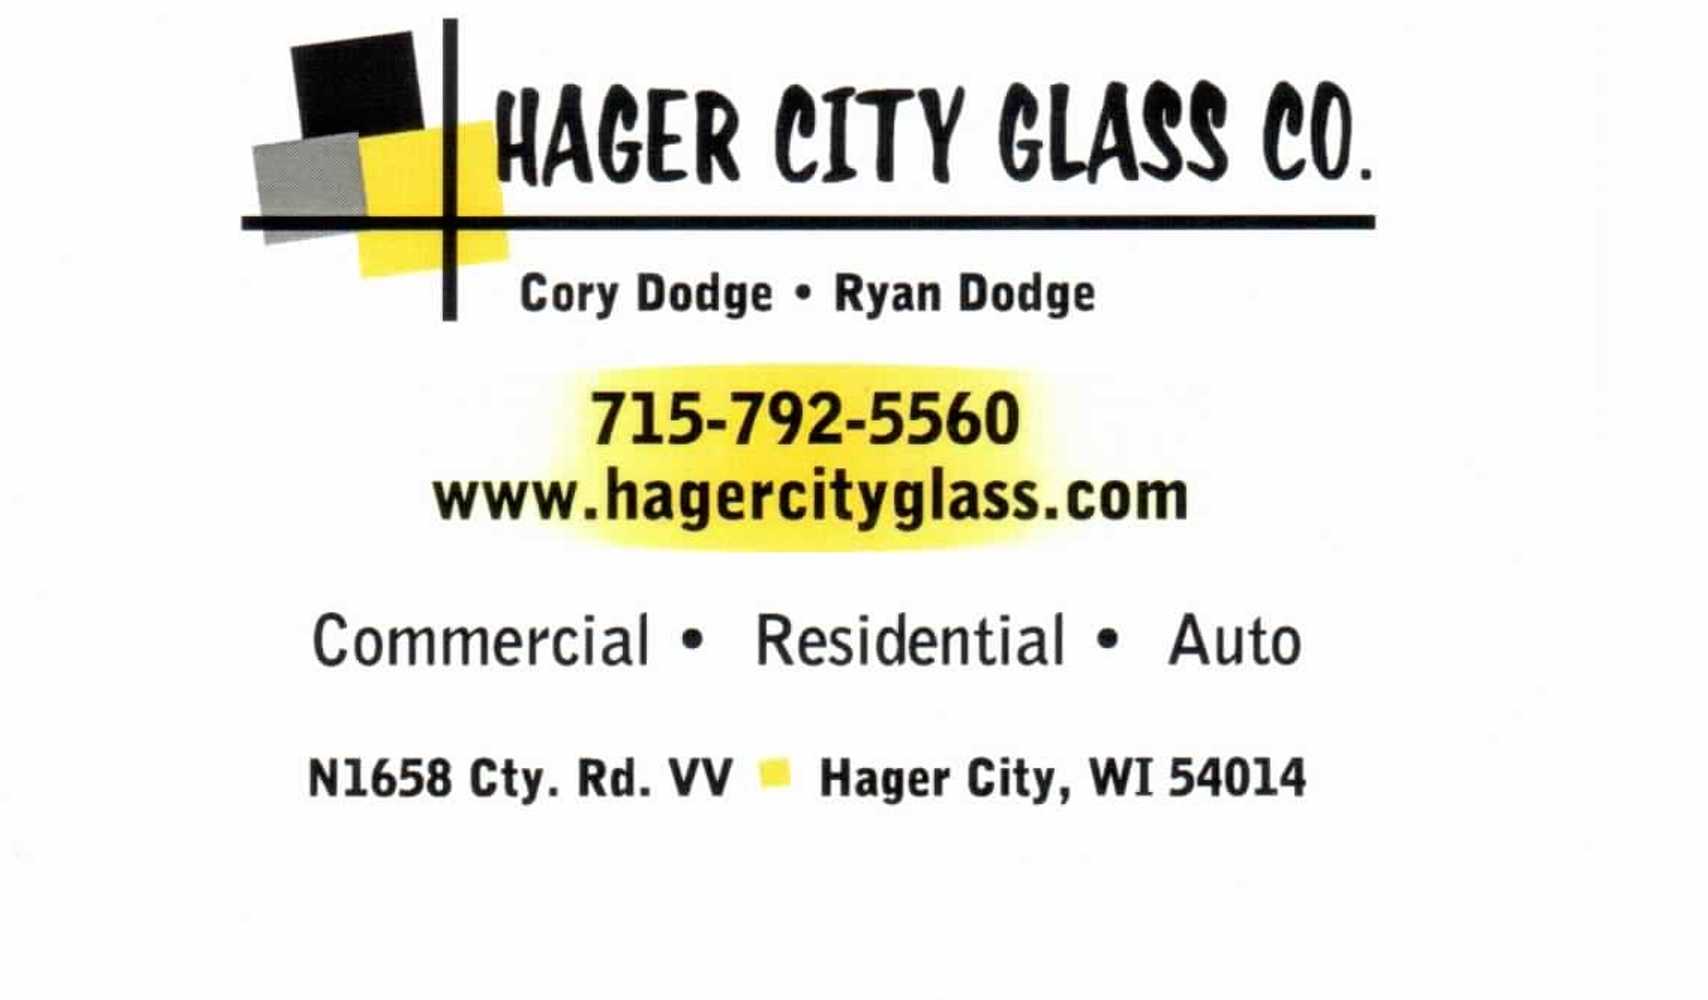 Hager City Glass Co Project